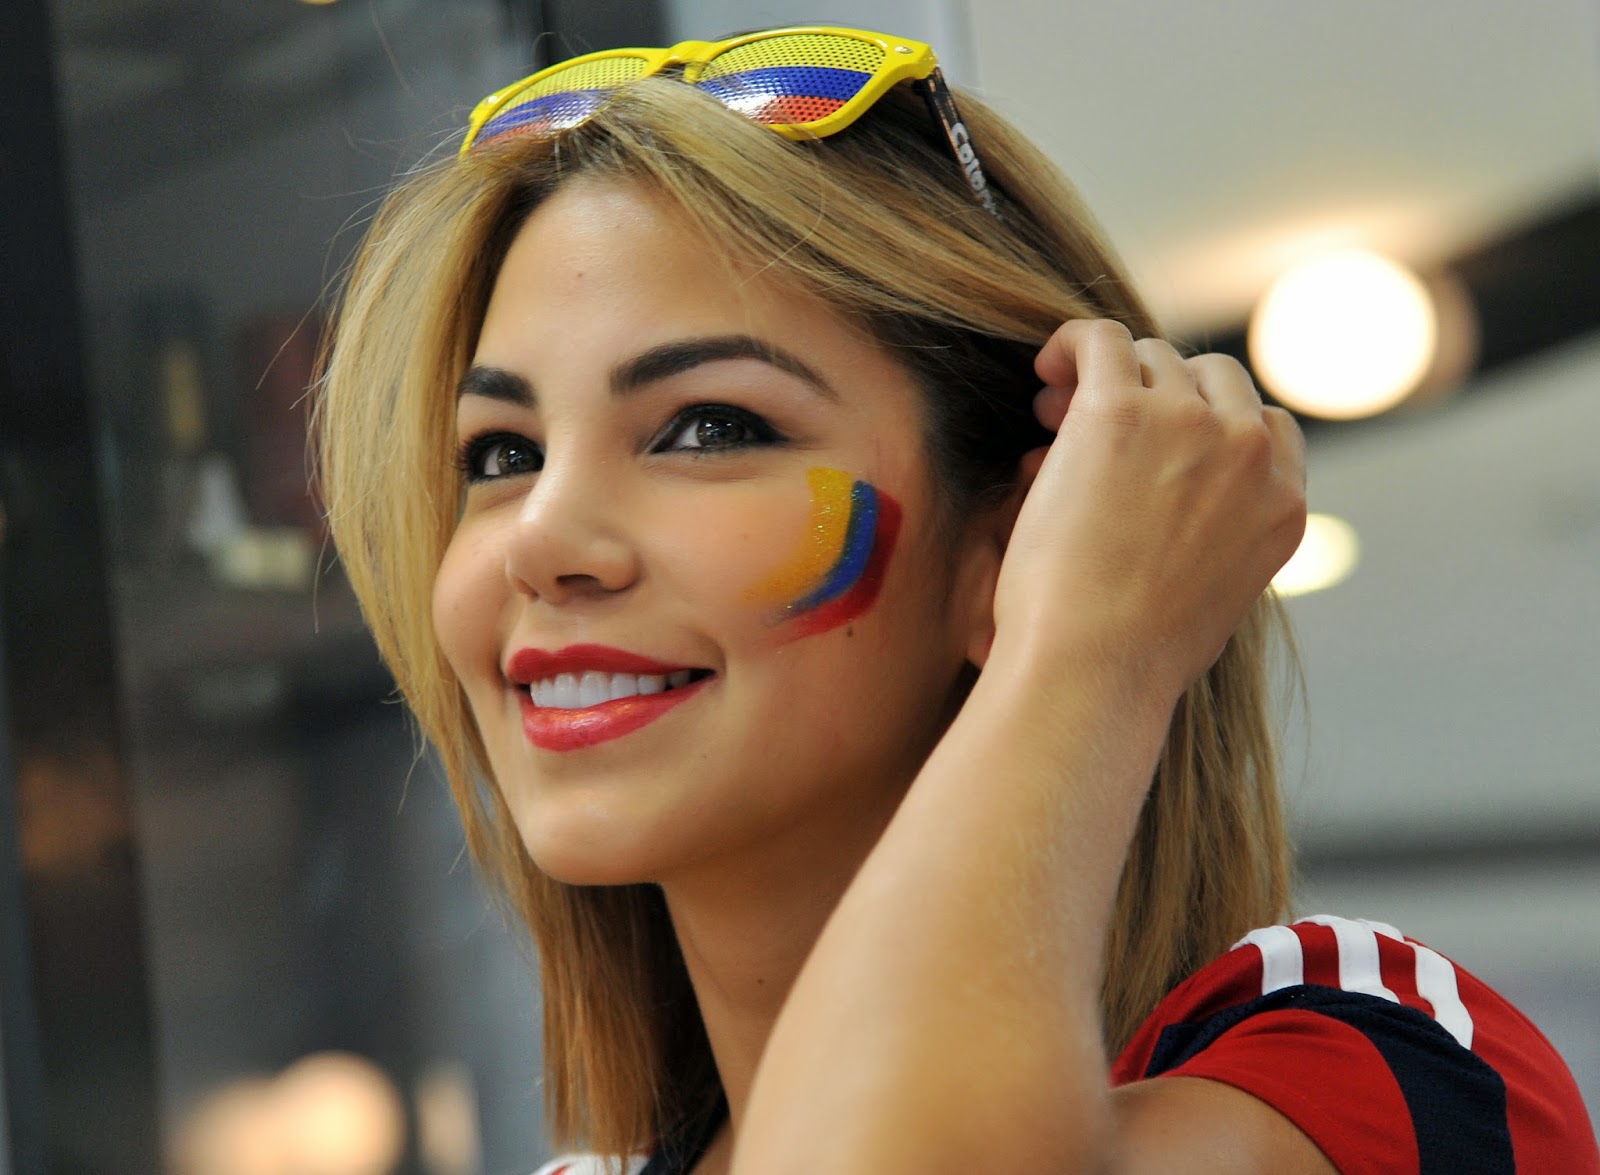 FIFA World Cup 2014: Brazil vs Colombia 57th Match in Pictures.